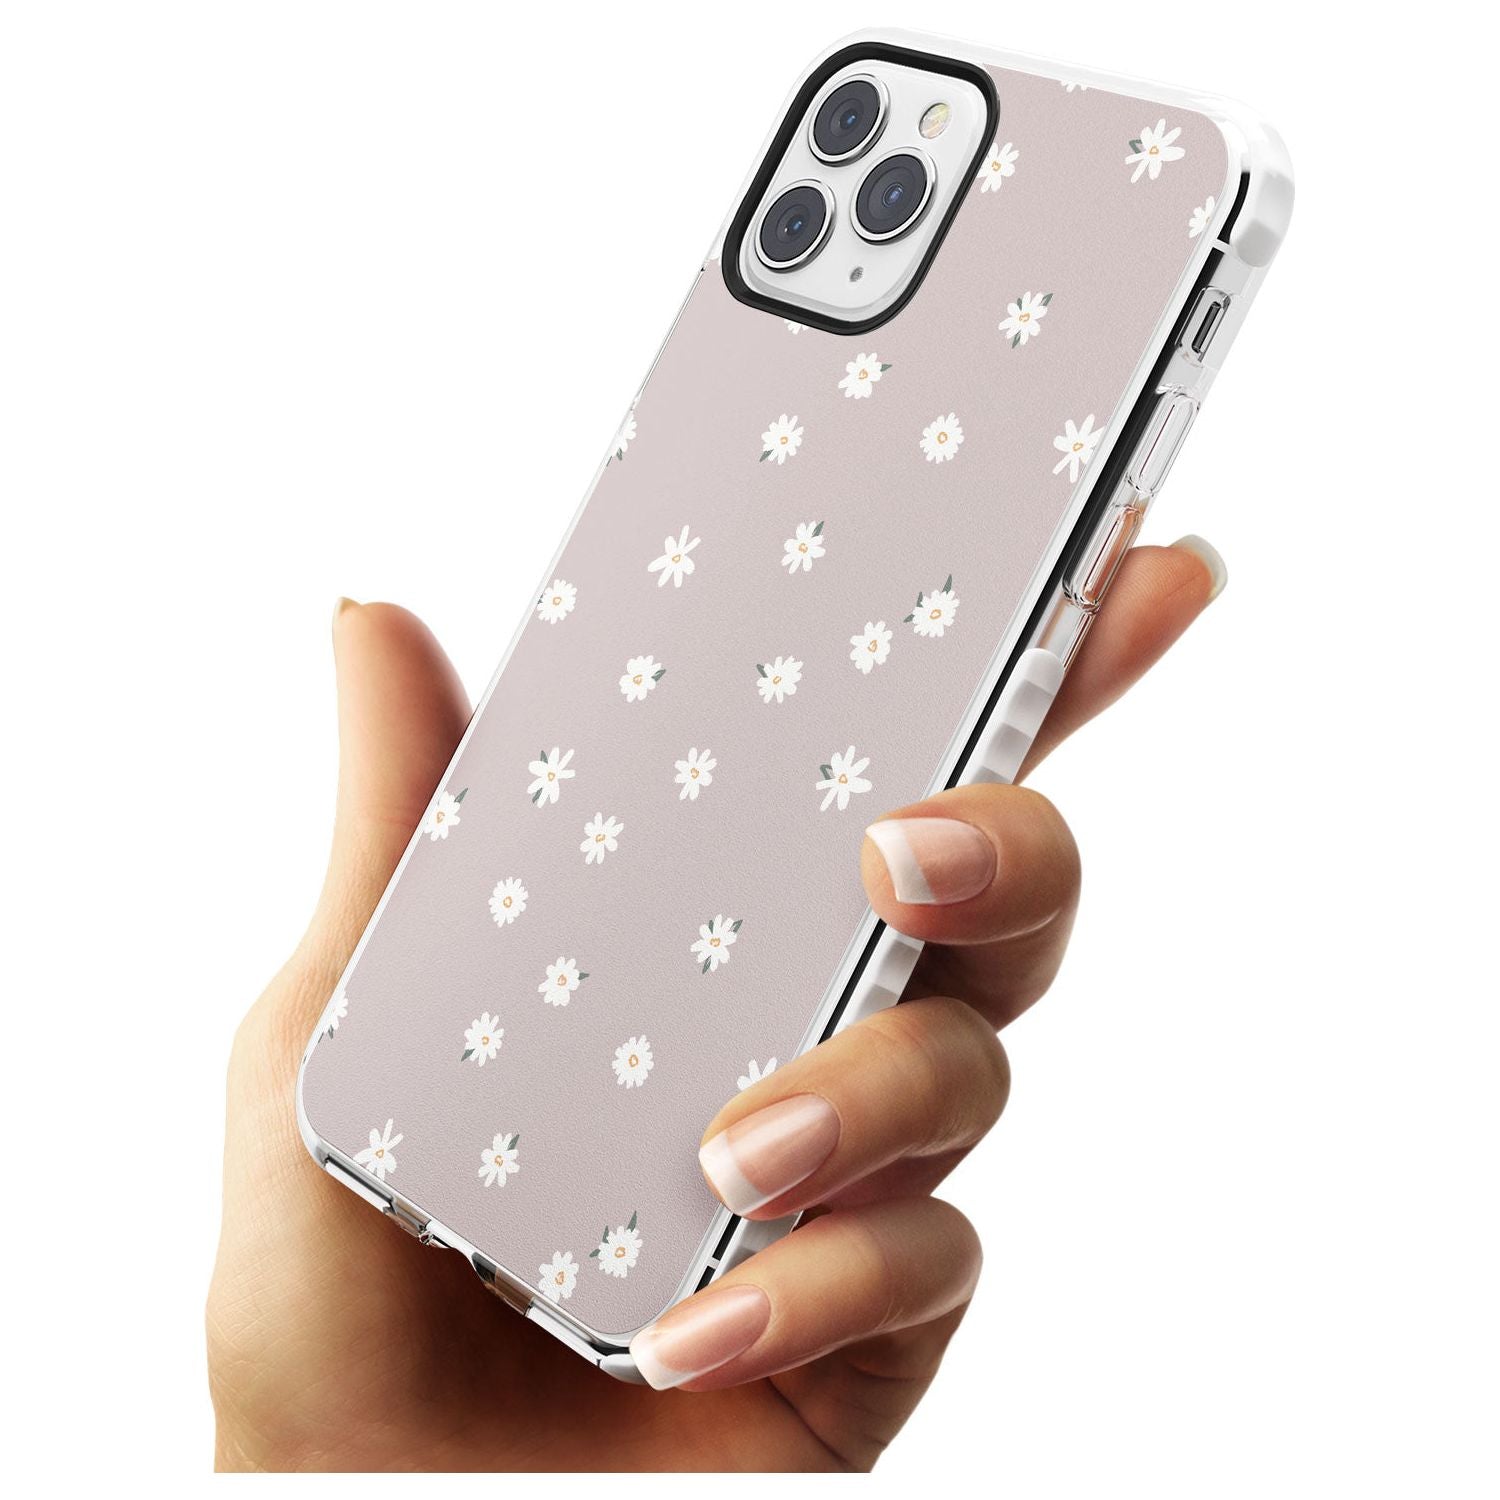 Painted Daises - Dark Pink Cute Floral Design Slim TPU Phone Case for iPhone 11 Pro Max